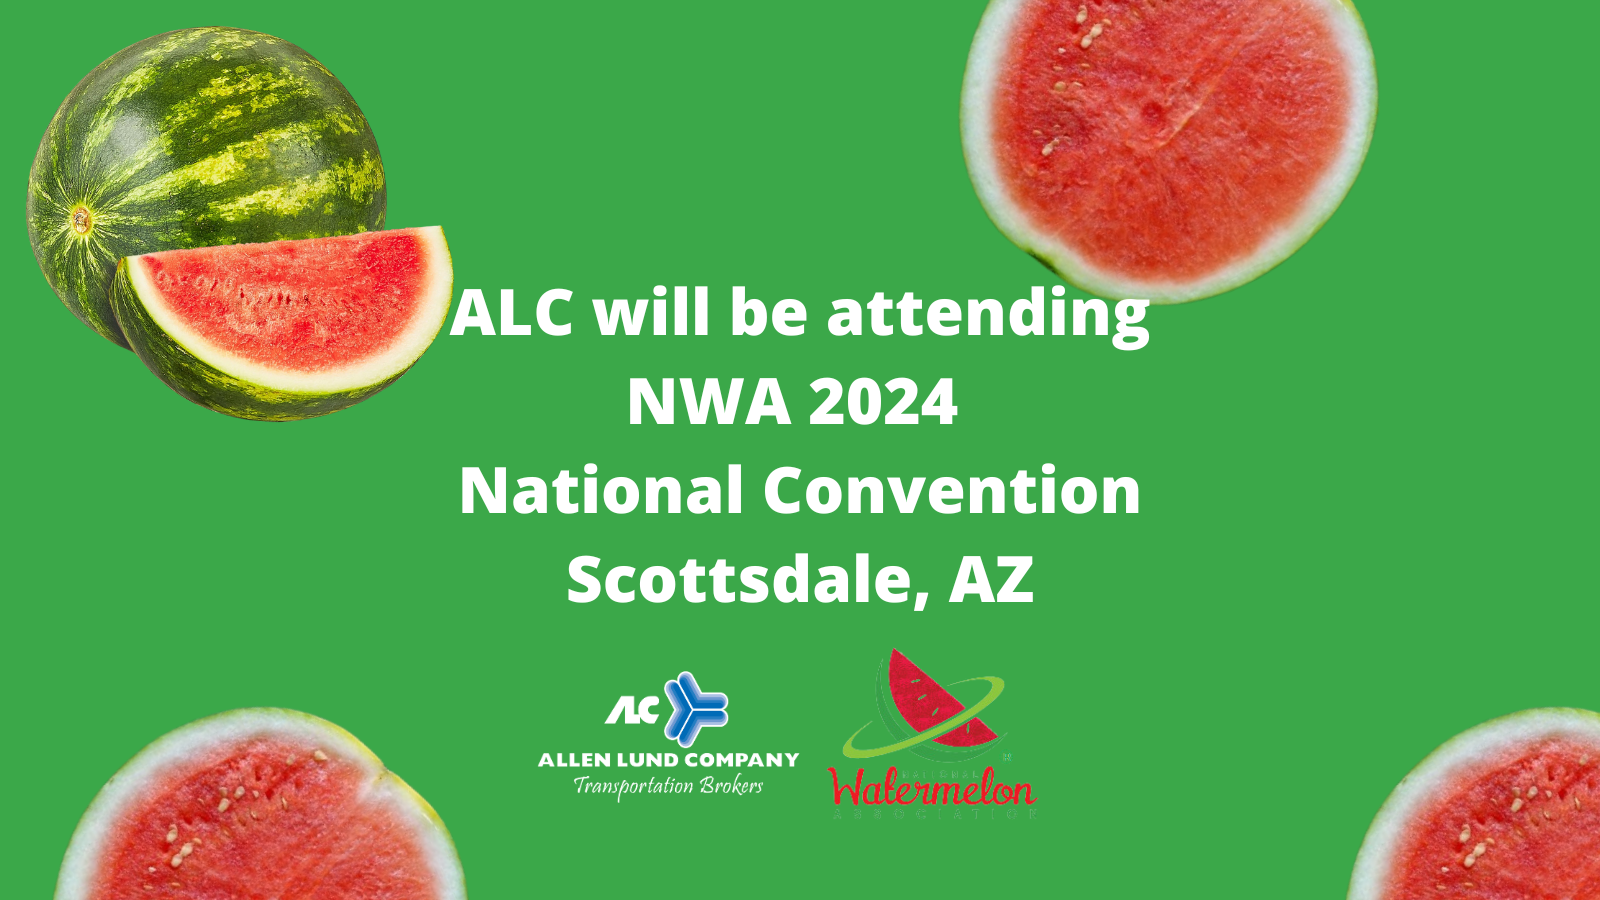 ALC will be attending the NWA 2024 National Convention